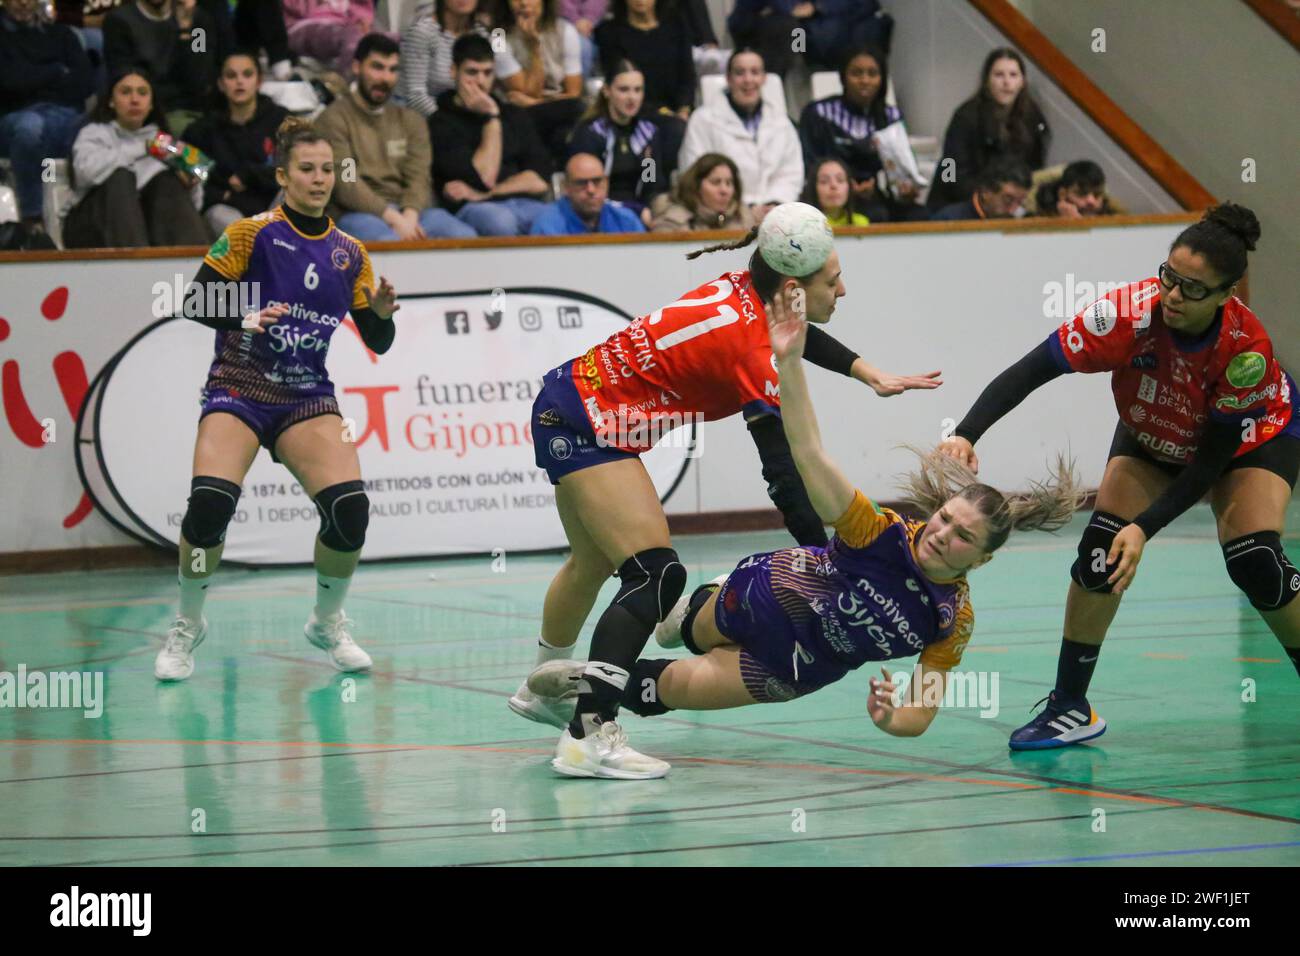 Gijón, Spain. 27th Jan, 2024. The player of Motive.co Gijón Balonmano La Calzada, Dorottya Margit Zentai (66) shoots on goal against two rivals during the 15th Matchday of the Liga Guerreras Iberdrola 2023-24 between Motive.co Gijón La Calzada Handball and Conserbas Orbe Rubensa BM. Porriño, on January 27, 2024, at the Arena Pavilion, in Gijón, Spain. (Photo by Alberto Brevers/Pacific Press) Credit: Pacific Press Media Production Corp./Alamy Live News Stock Photo